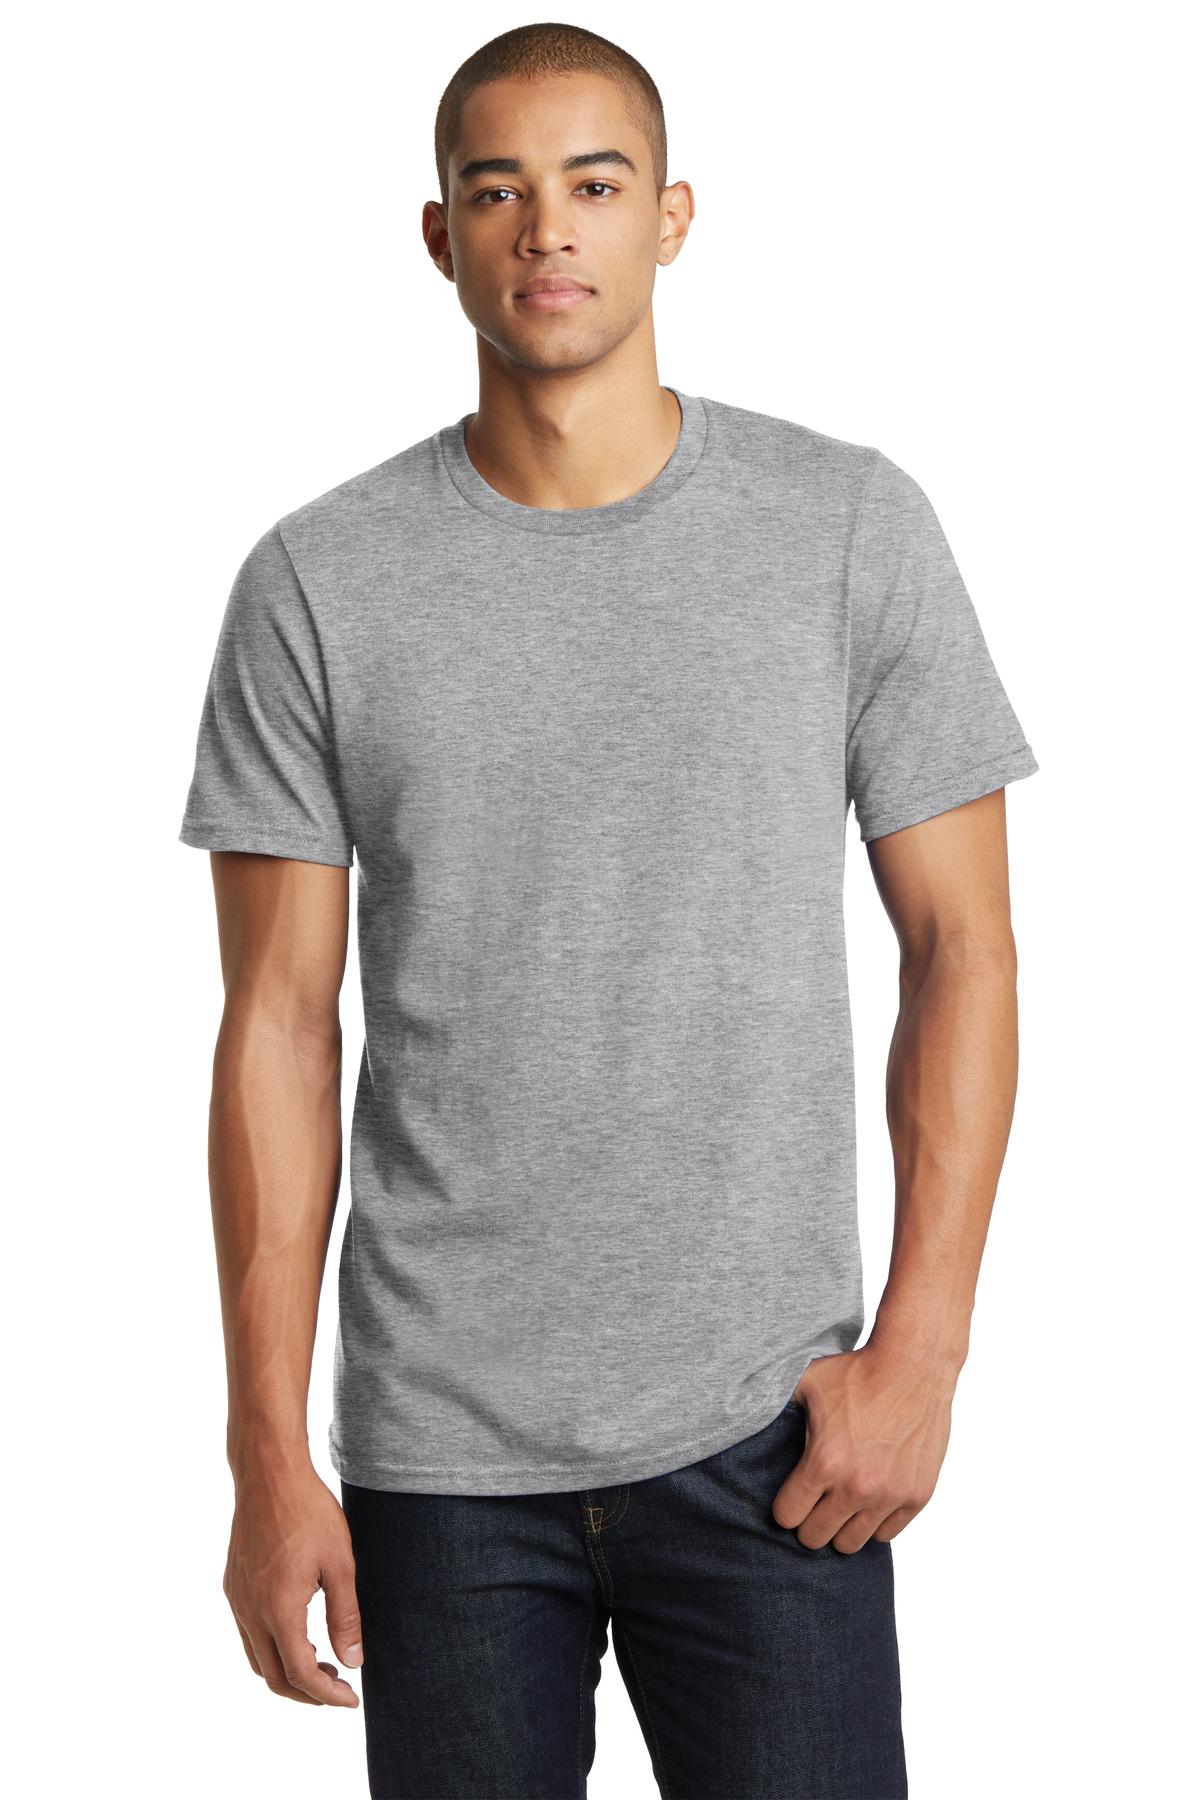 District  DT7000 - Young Mens Bouncer Tee